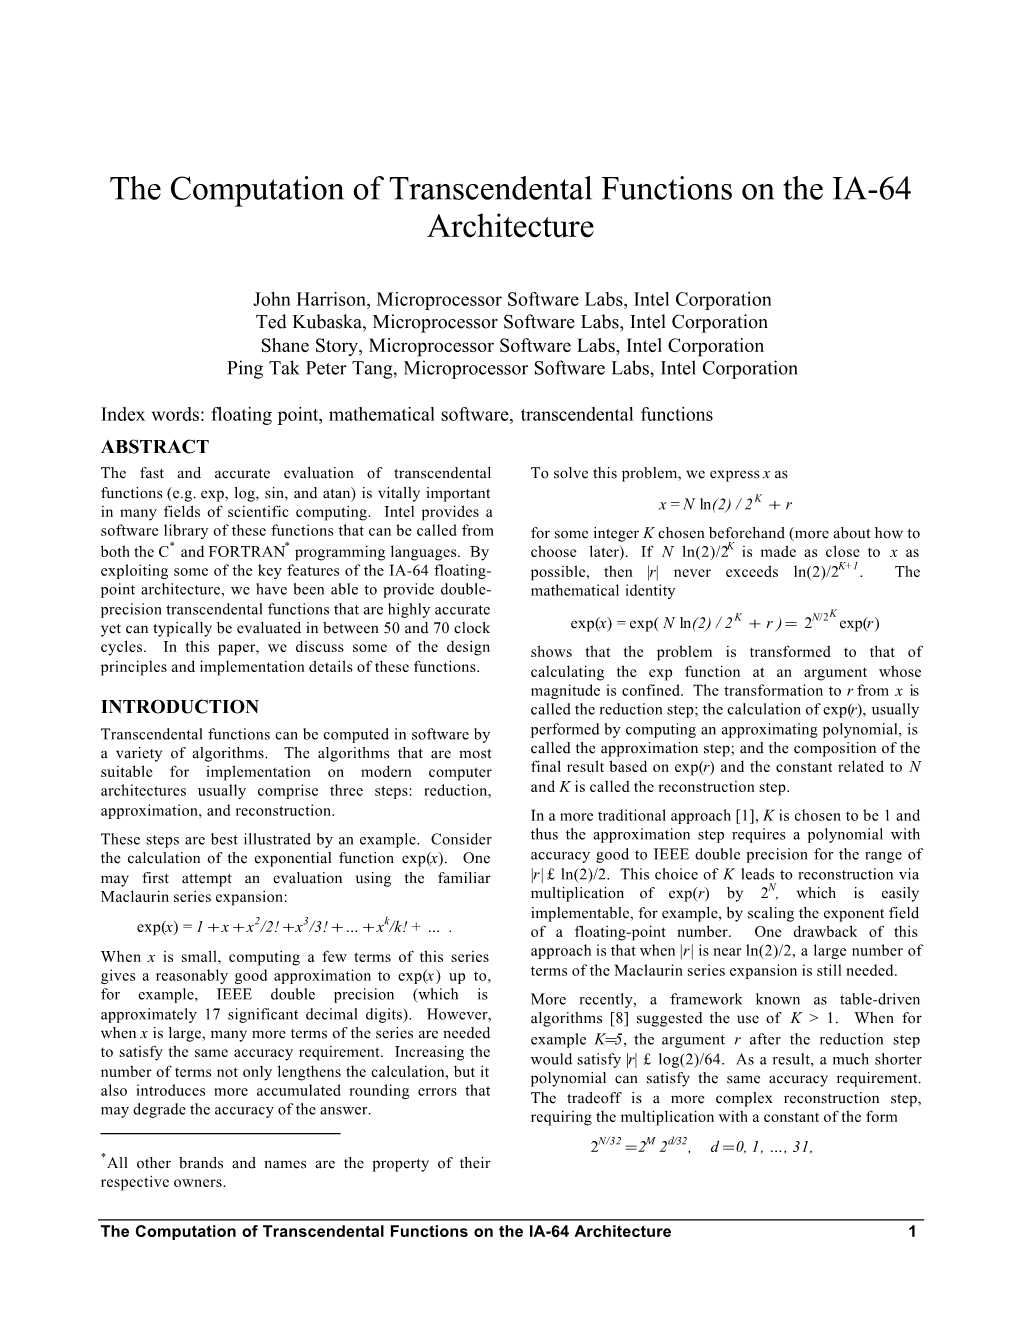 The Computation of Transcendental Functions on the IA-64 Architecture